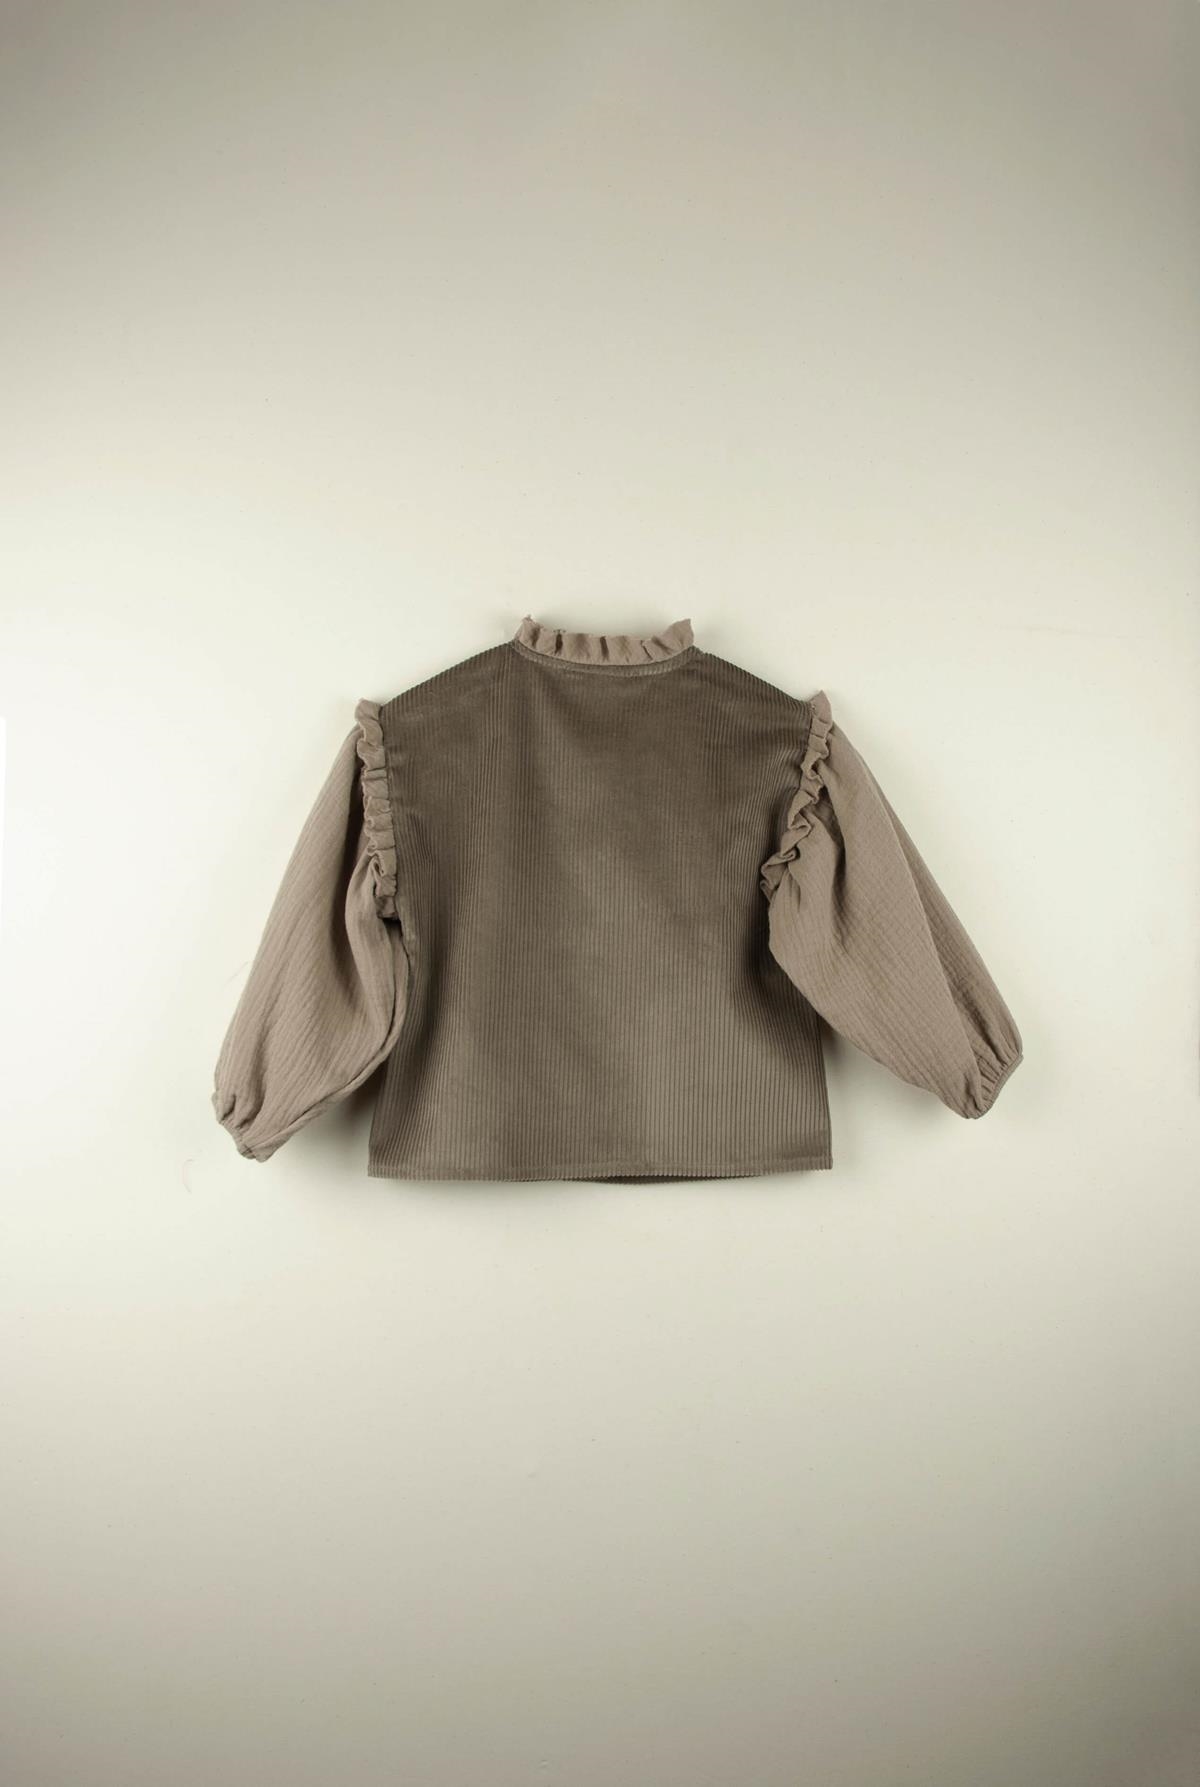 Mod.14.3 Taupe blouse with puffed sleeve | AW21.22 Mod.14.3 Taupe blouse with puffed sleeve | 1